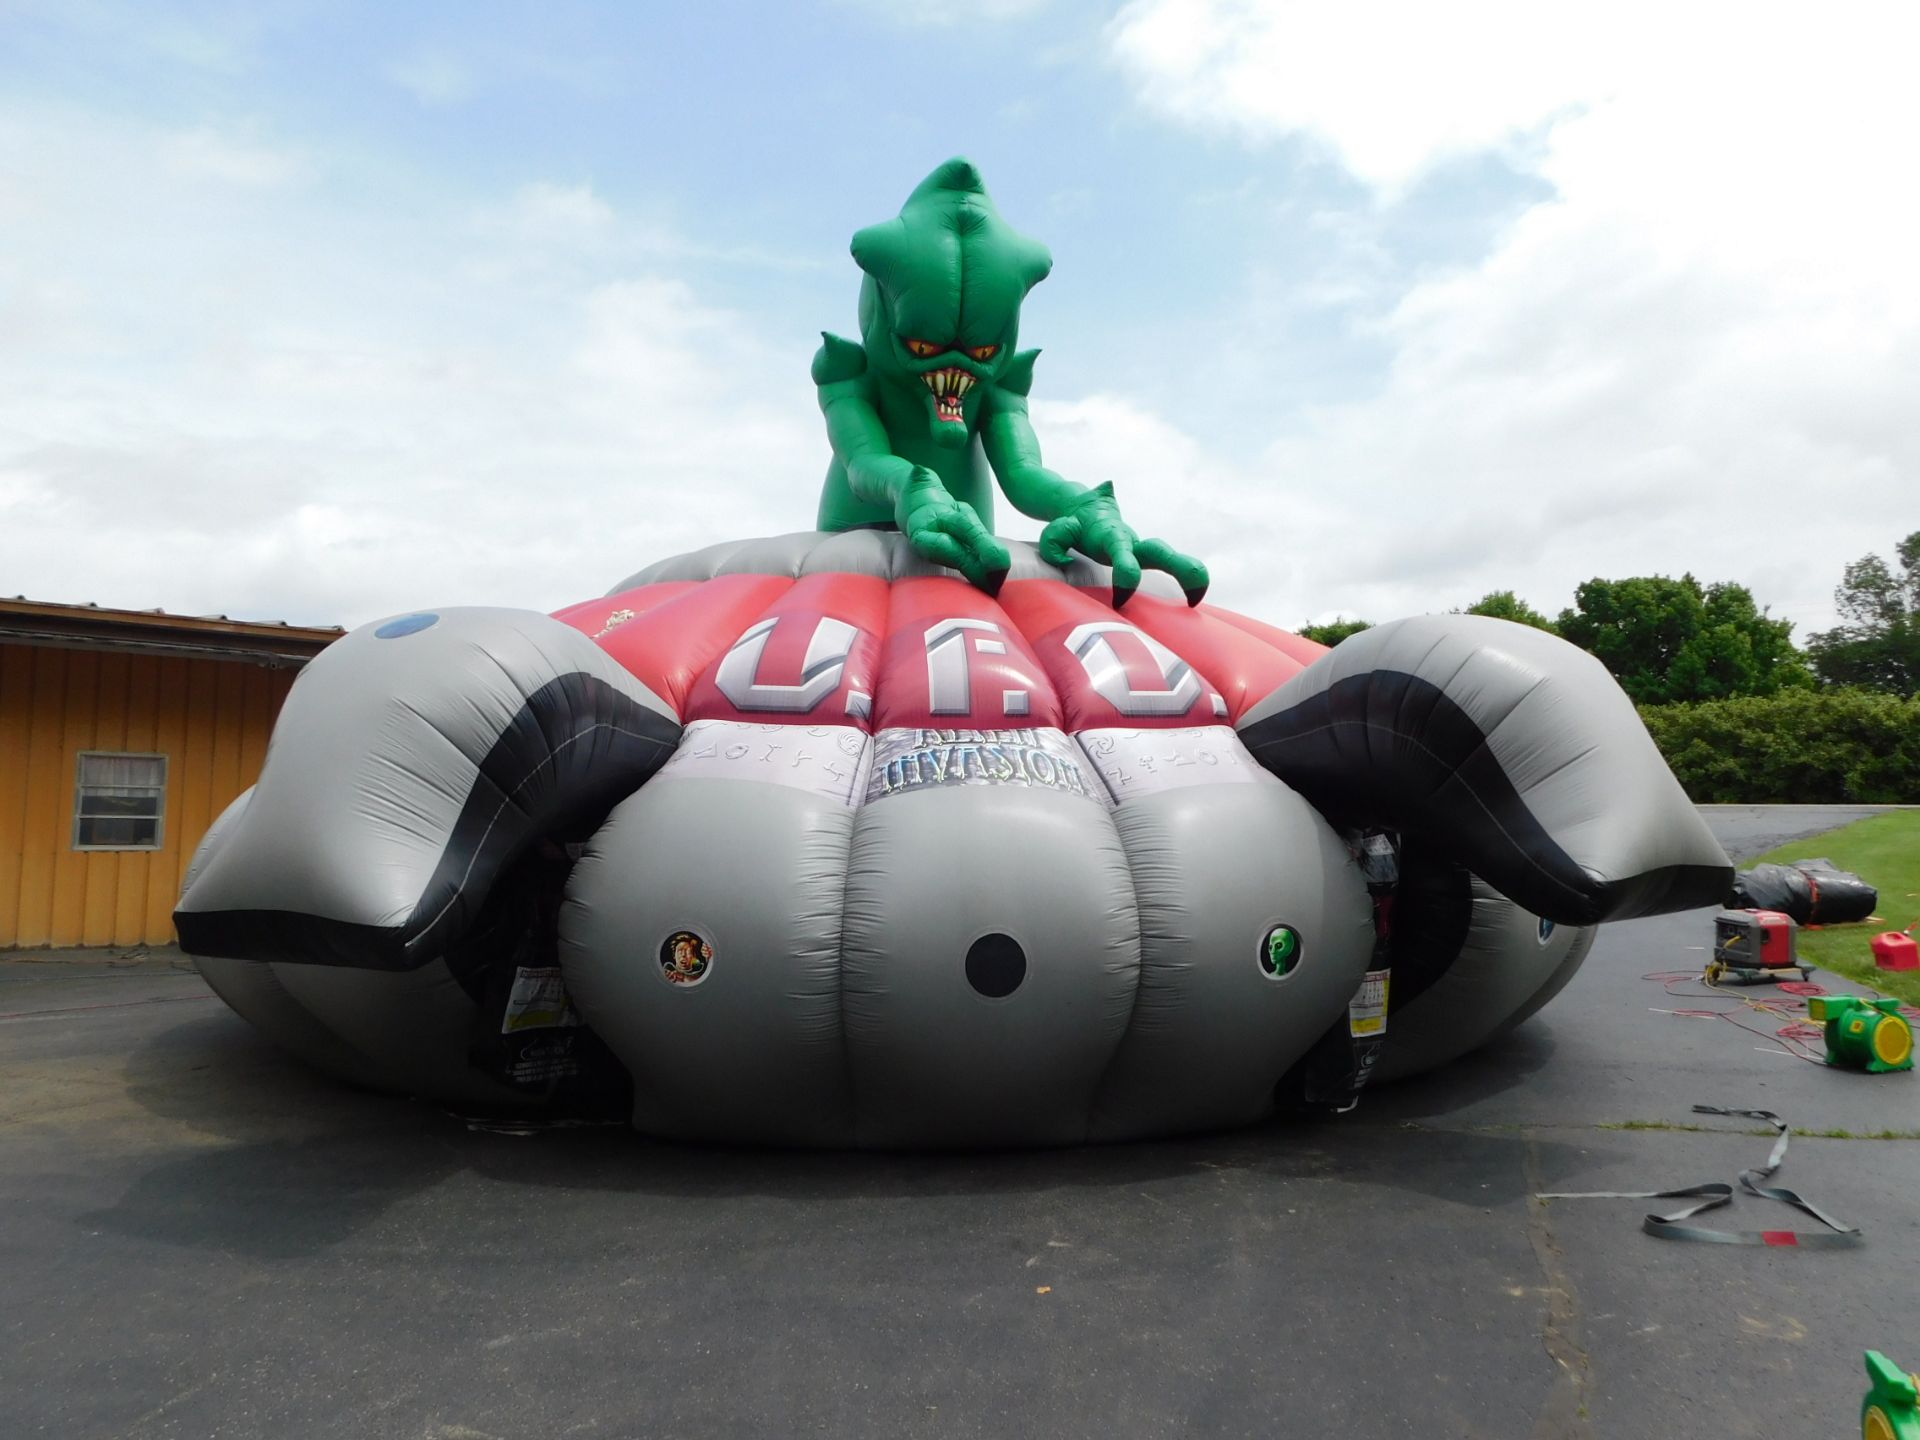 N-Flatables UFO Maze Inflatable Flying Saucer, (used for Laser tag-Guns Not Included) 40'UFO - Image 2 of 22